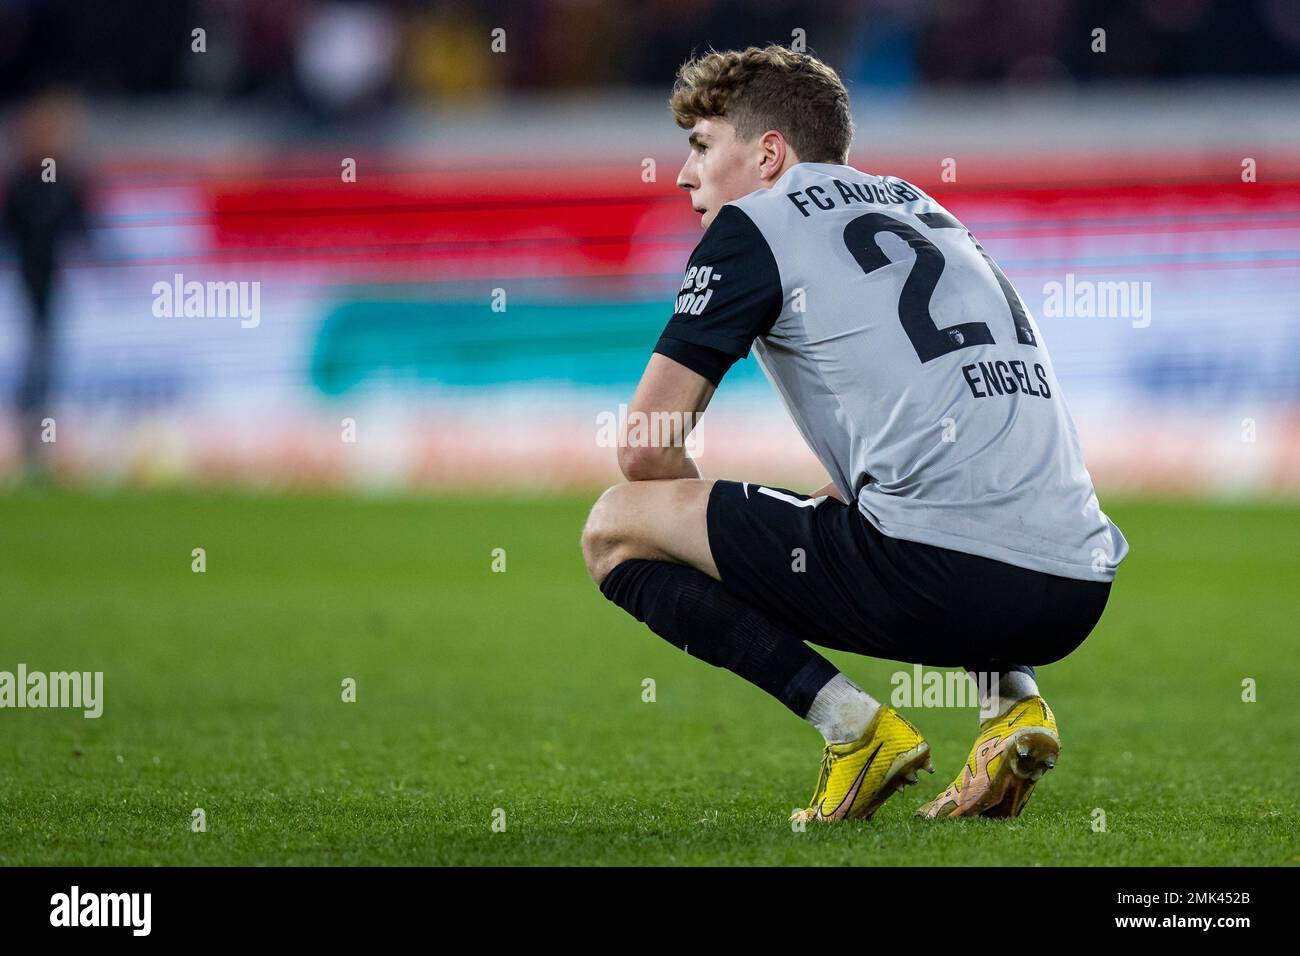 Freiburg Im Breisgau, Germany. 28th Jan, 2023. Soccer: Bundesliga, SC  Freiburg - FC Augsburg, Matchday 18, Europa-Park Stadion. Augsburg's Arne  Engels reacts unhappily after the game. Credit: Tom Weller/dpa - IMPORTANT  NOTE: